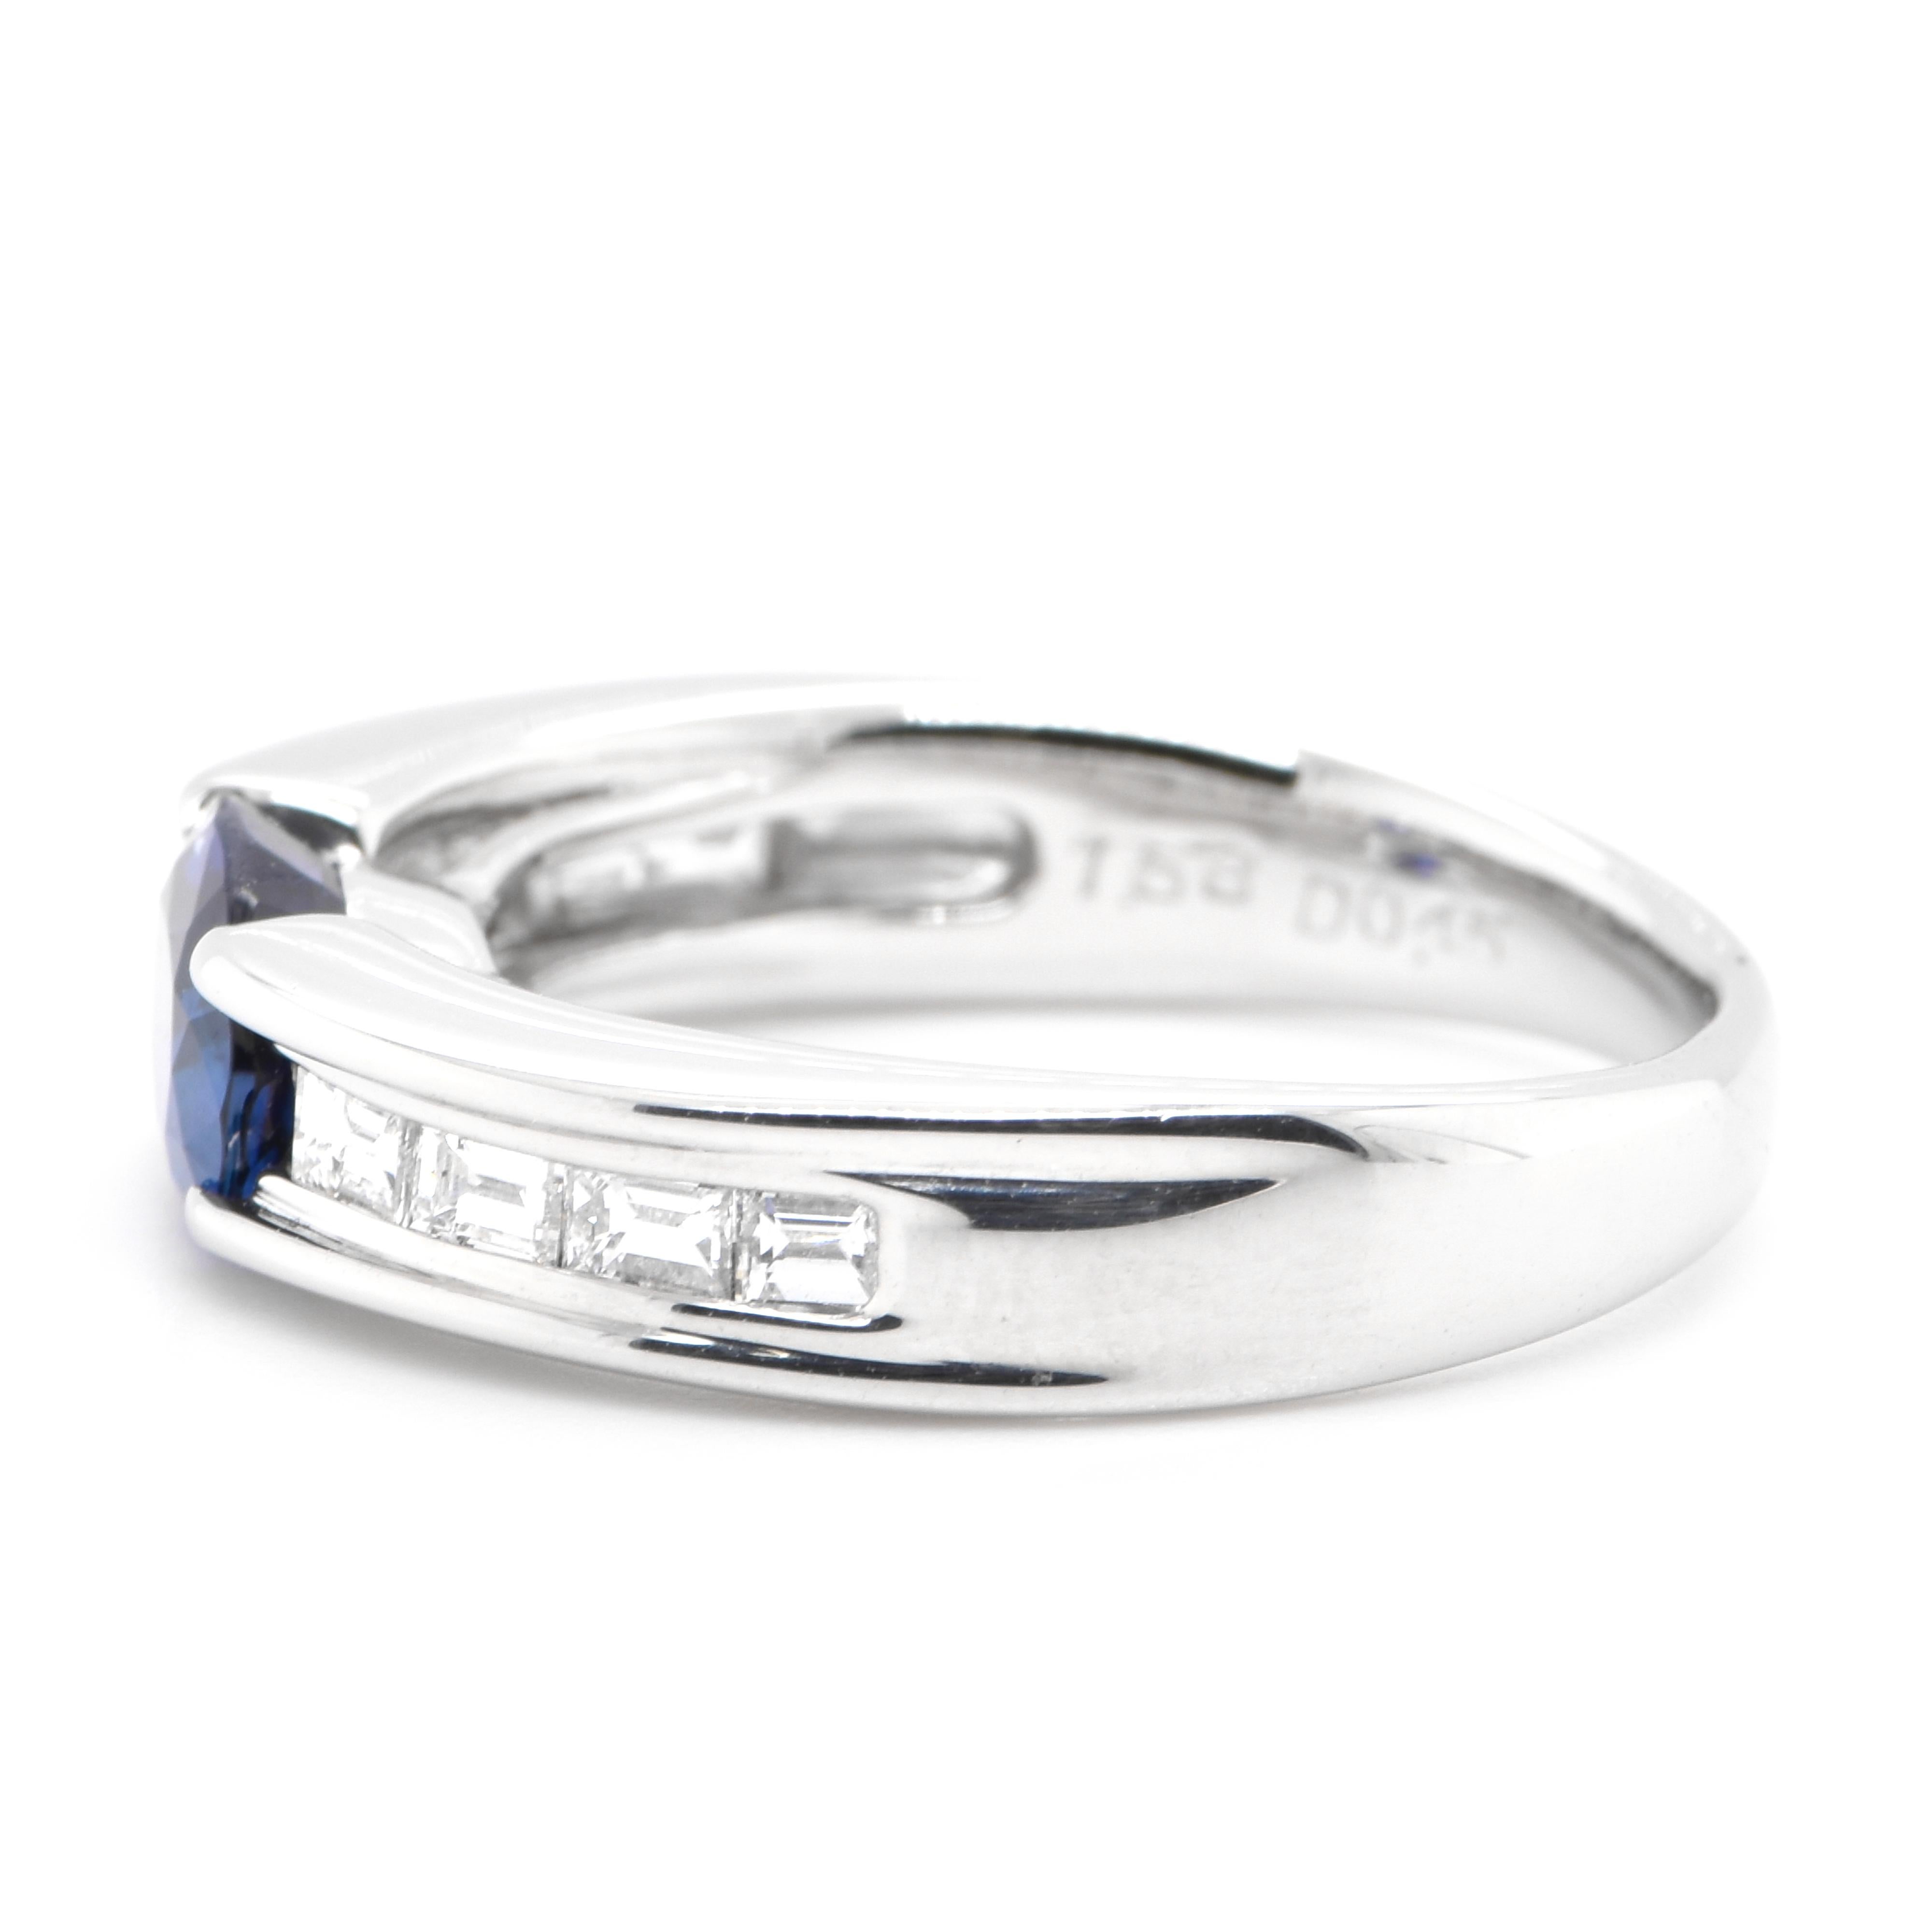 Oval Cut 1.53 Carat Natural Blue Sapphire and Diamond Band Ring Set in Platinum